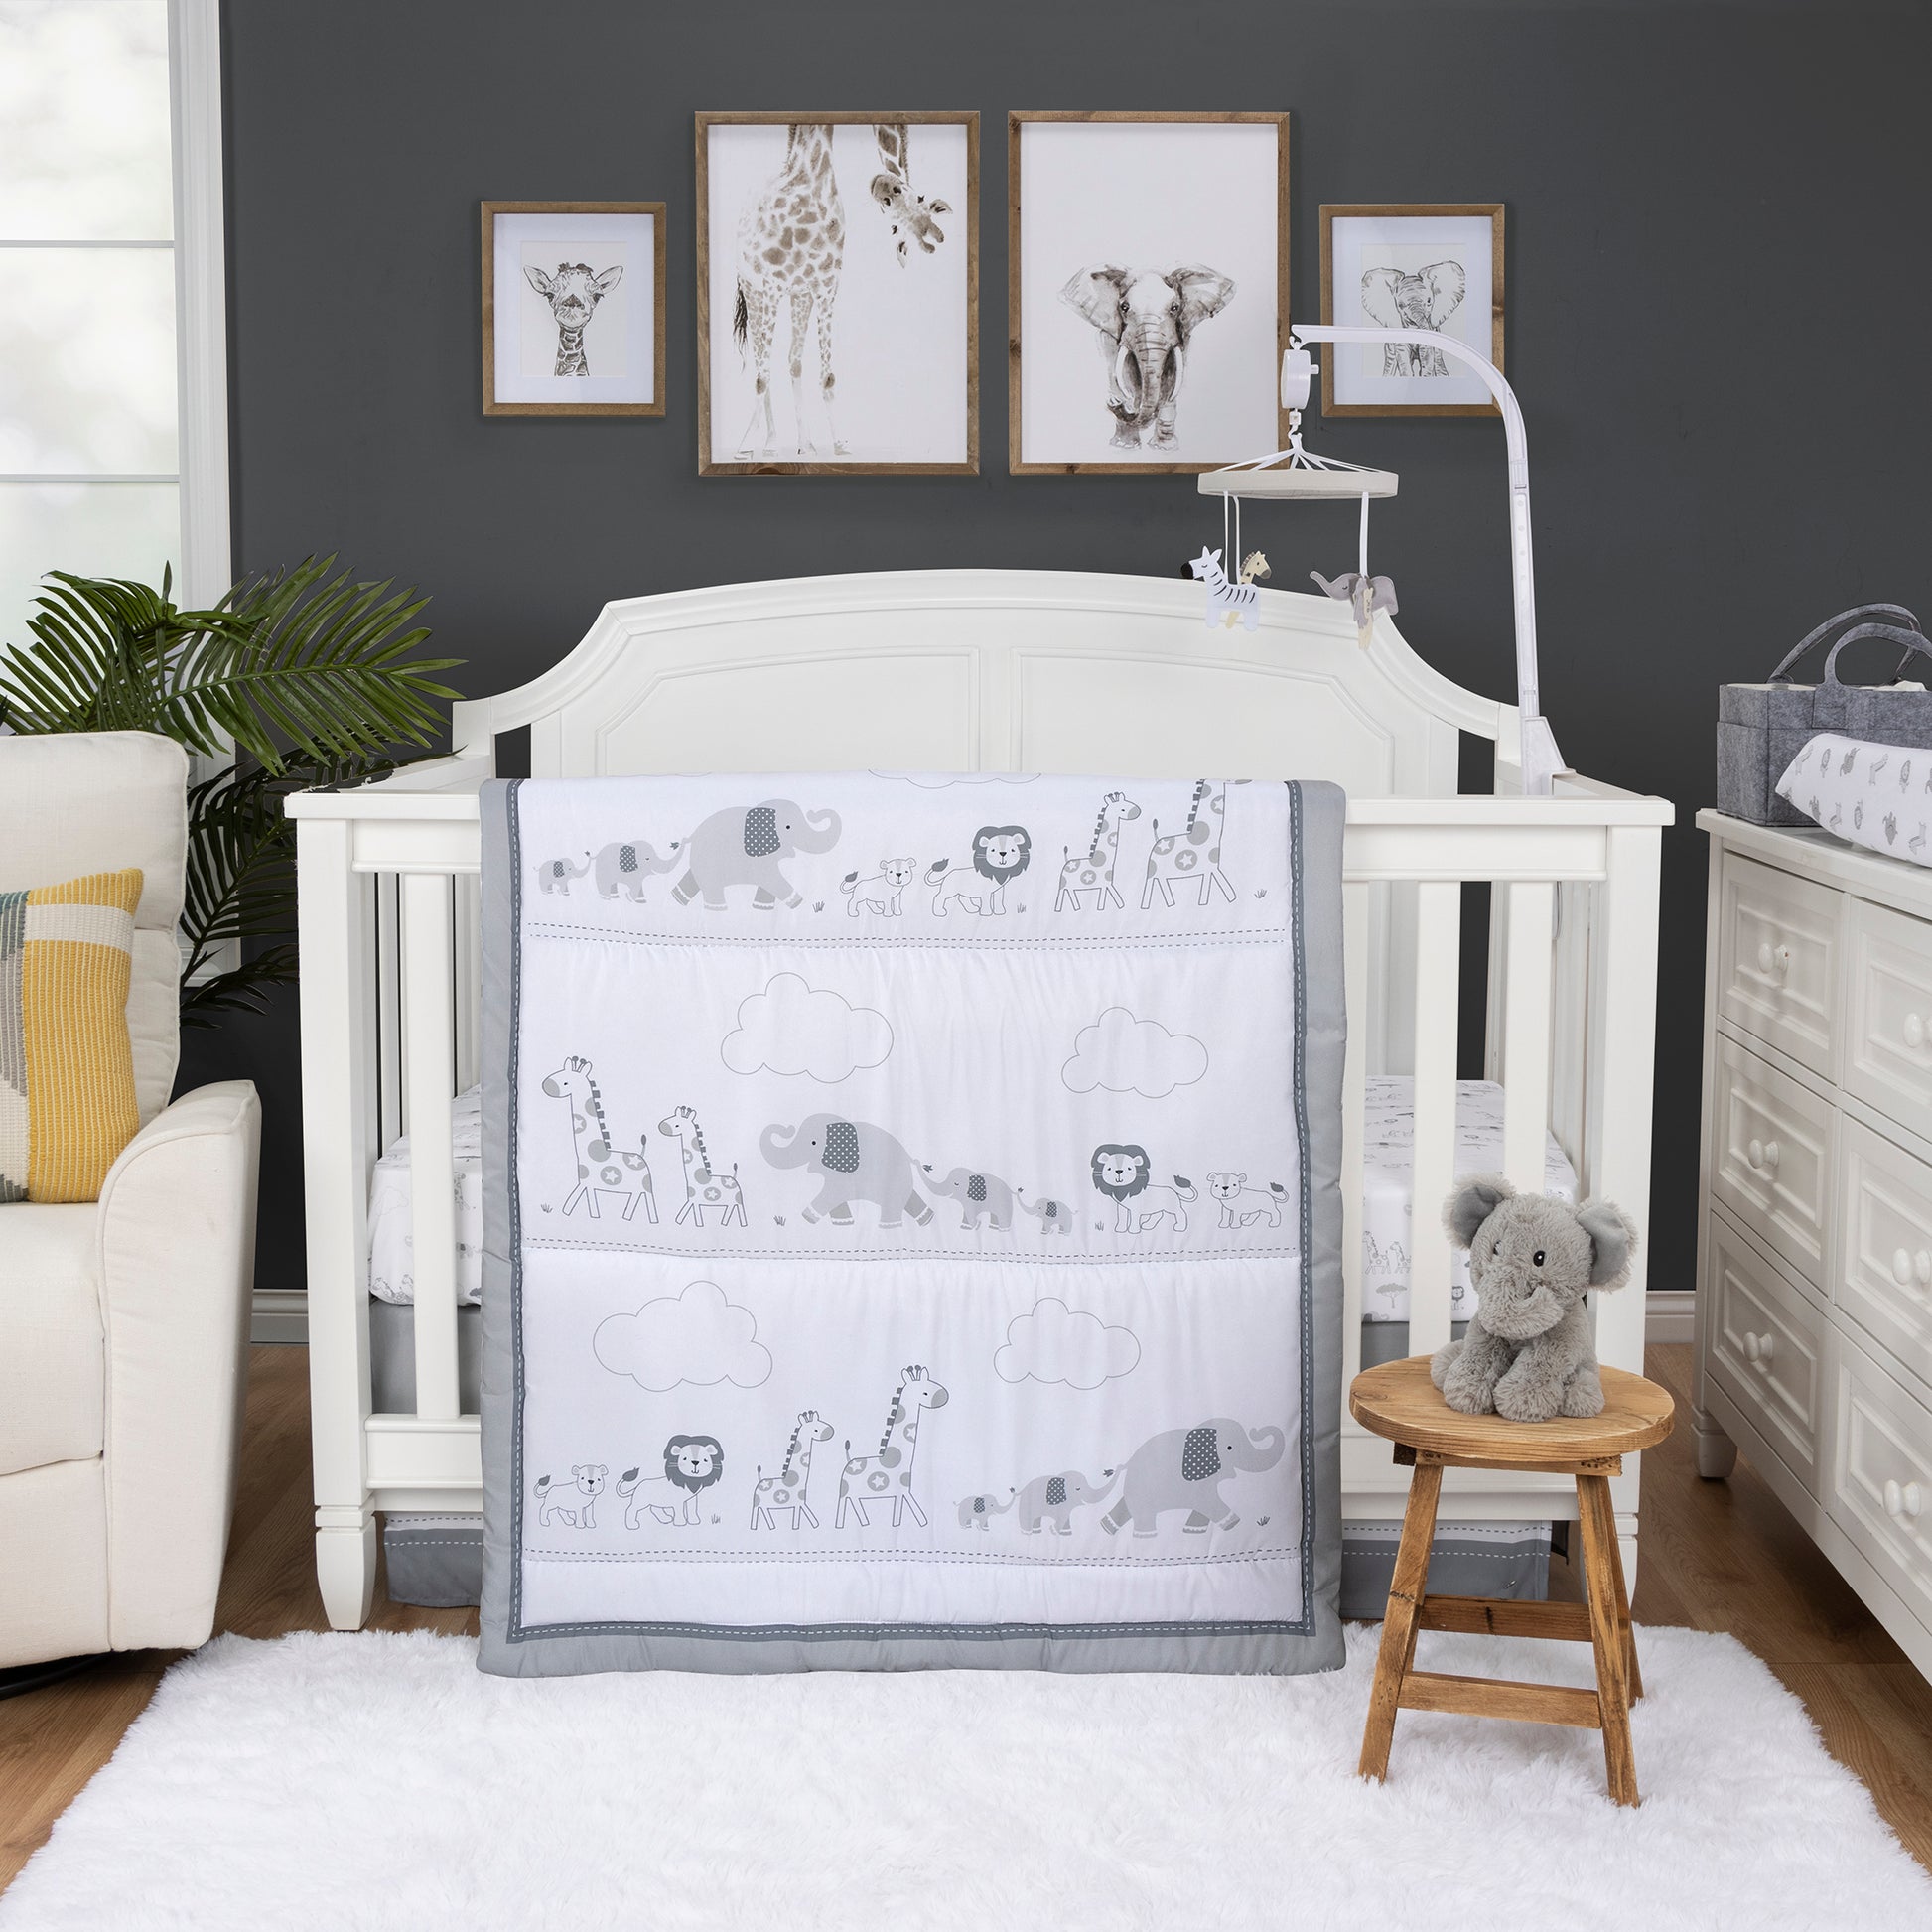 Follow the Leader 4 Piece Crib Bedding Set by Sammy & Lou. This collection features gray baby and grown lions, giraffes and elephants following each other through the dessert. A dashed bedtime gray inner border and a glacier gray outer border frames this 